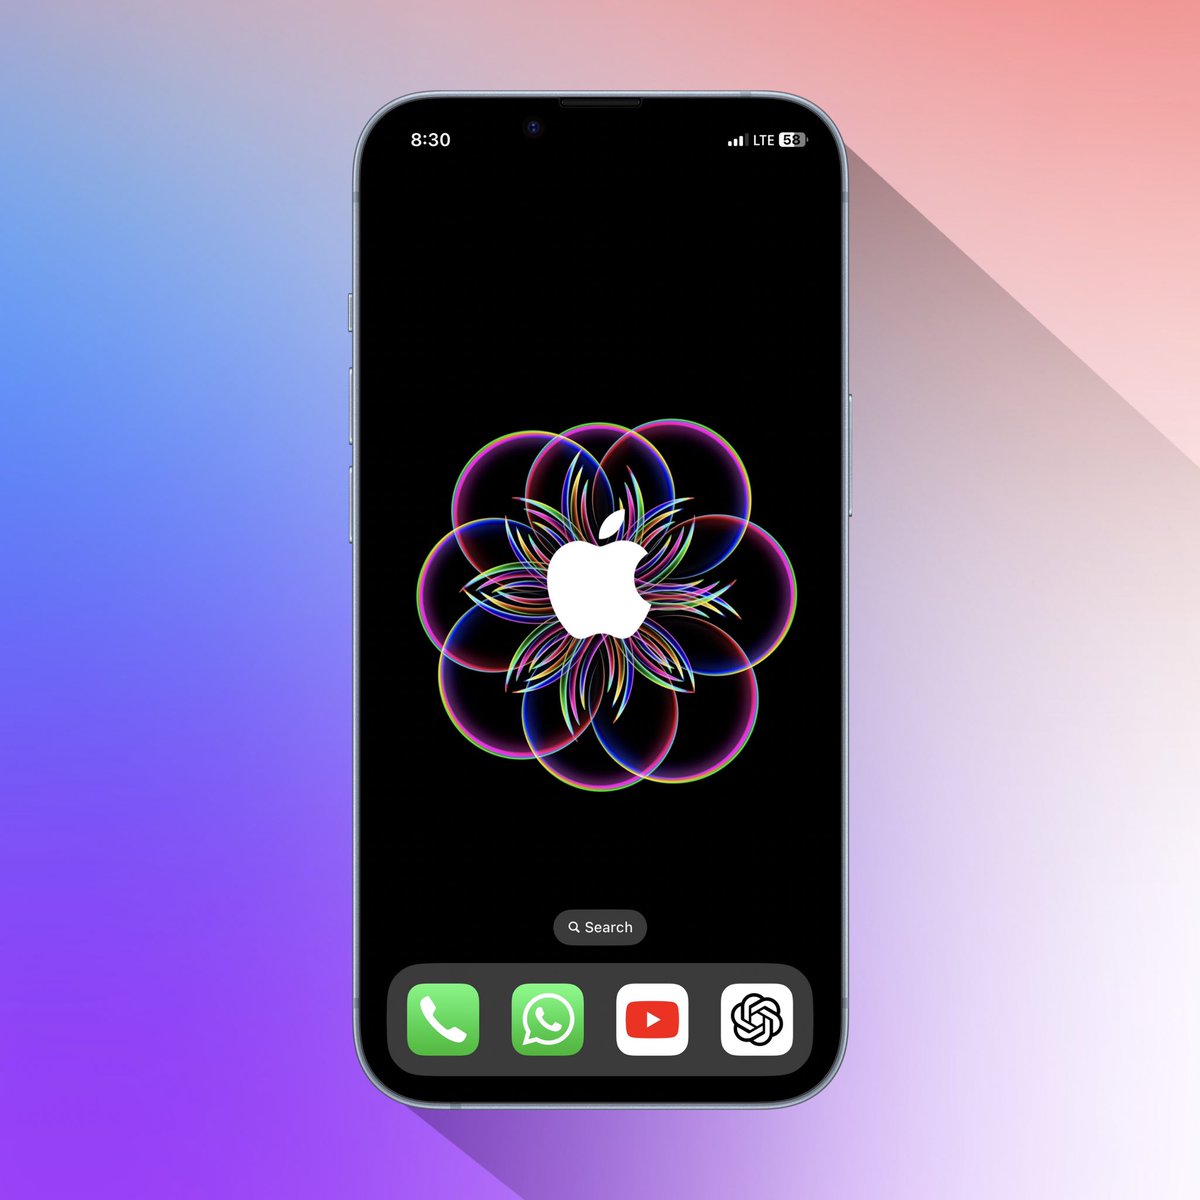 The new #Apple #WWDC23 #Wallpapers for #iPhone and desktops are here, and they are absolutely stunning!

#AppleWWDC2023 #WWDC2023 #AppleFans #NewWallpapers #iPhoneWallpaper #DesktopWallpaper #iOS